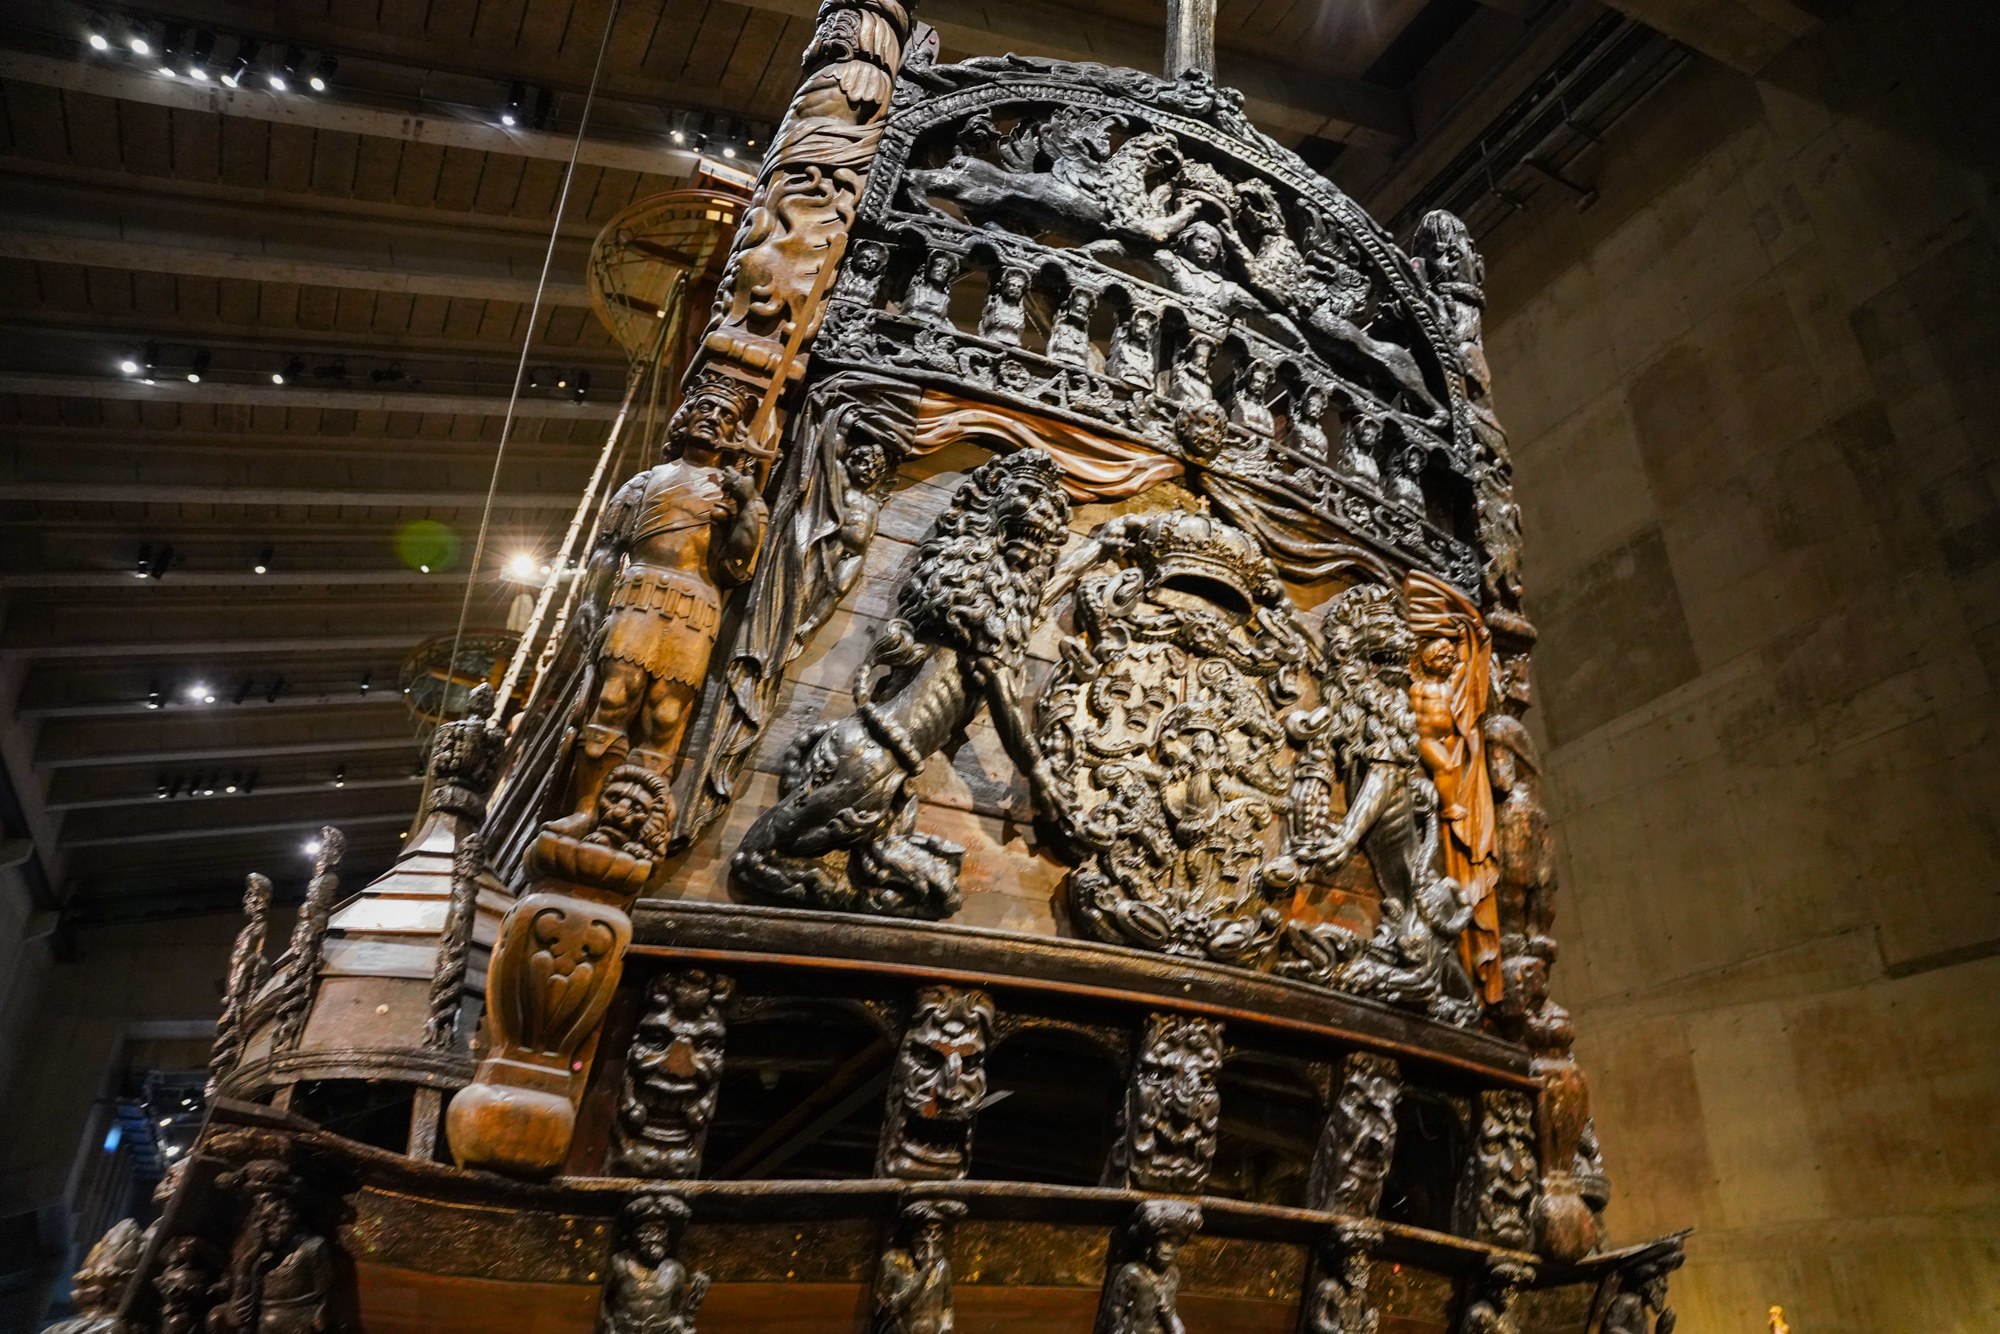 Woodwork on the Vasa Shipwreck